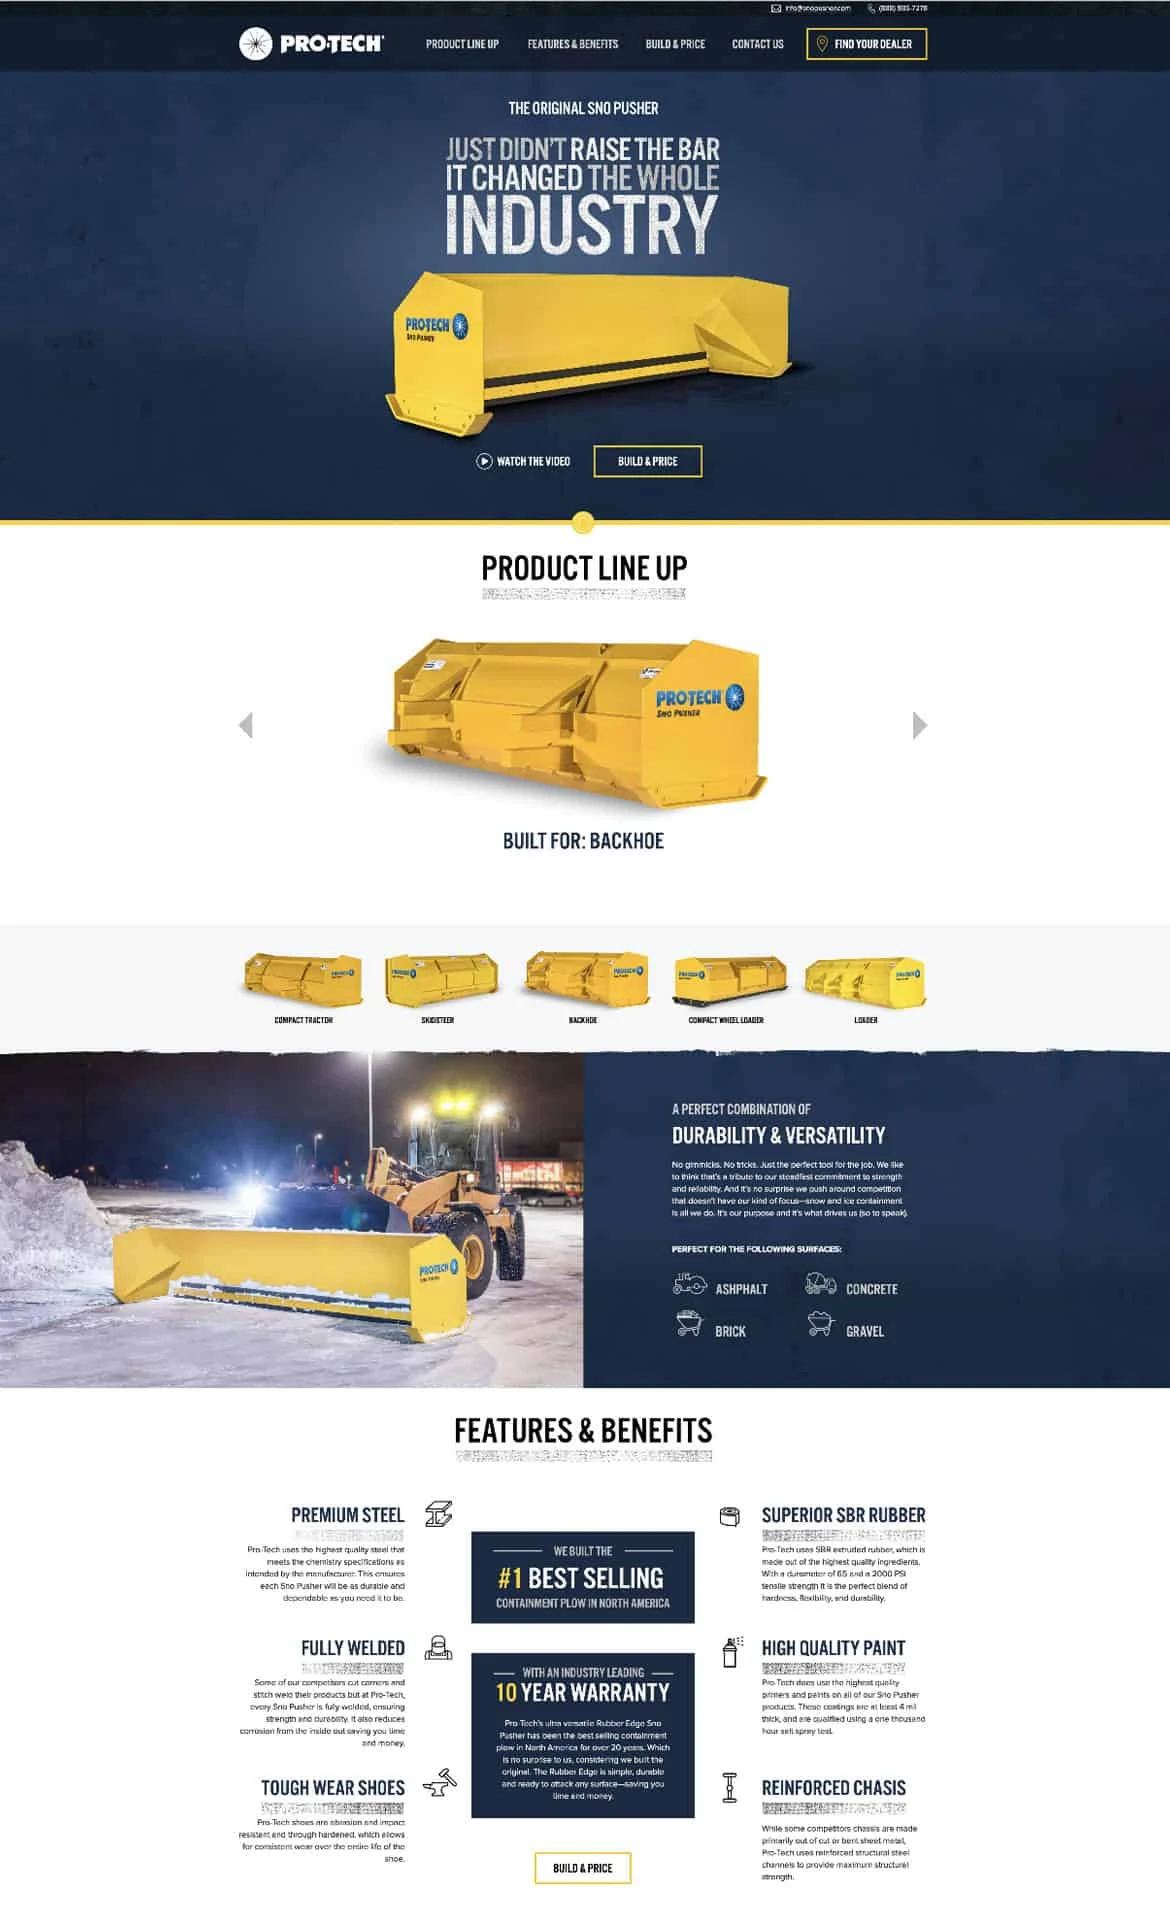 Screenshot of Pro-tech's website showing snow plow and snow plow features